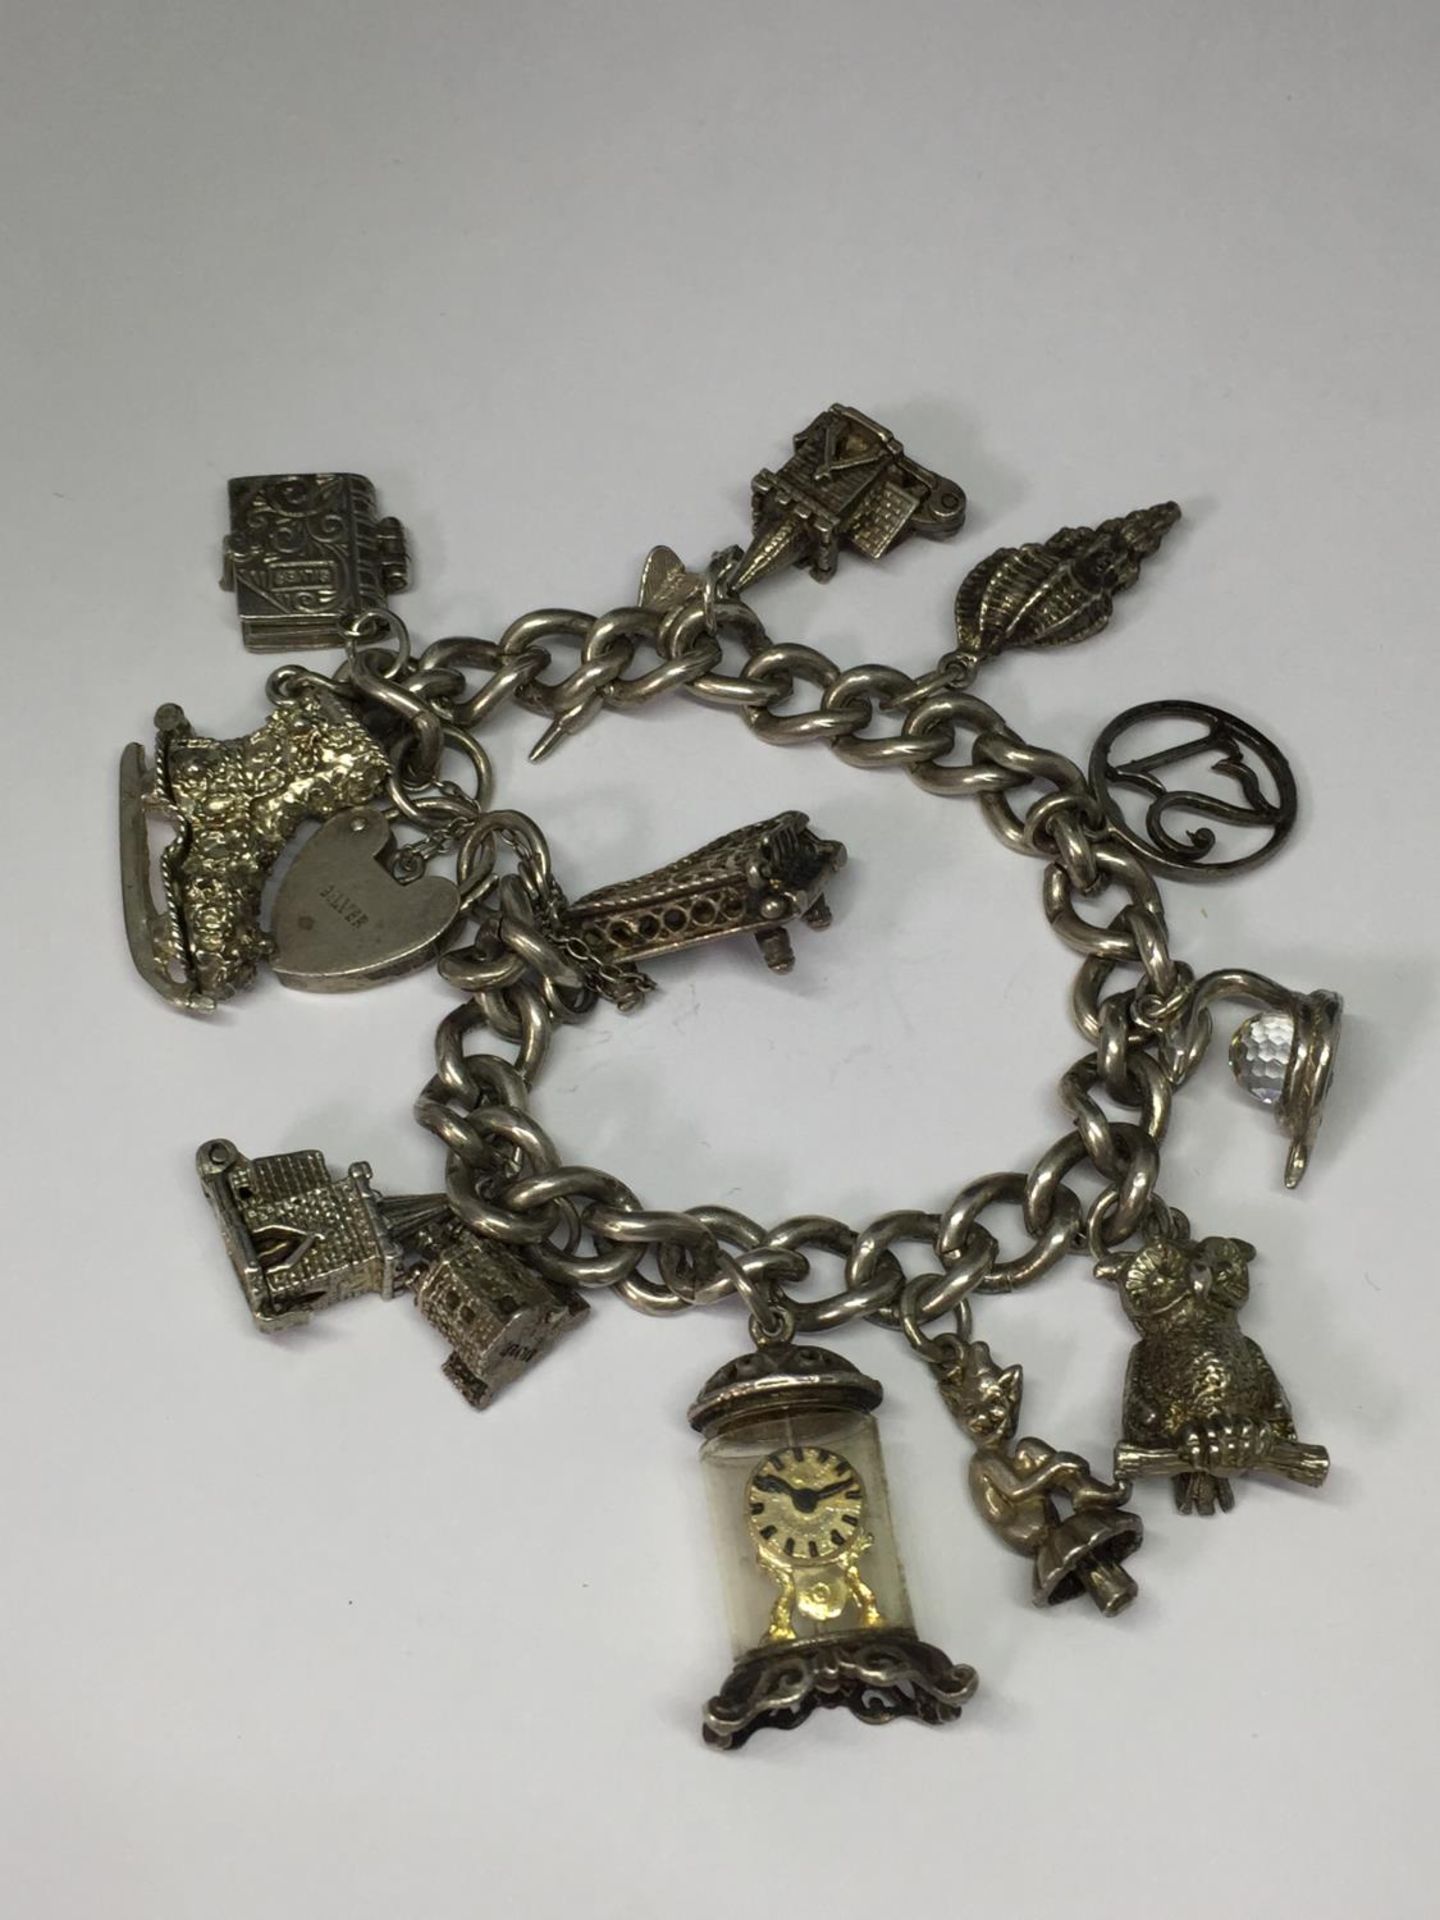 A SILVER CHARM BRACELET WITH THIRTEEN VARIOUS CHARMS